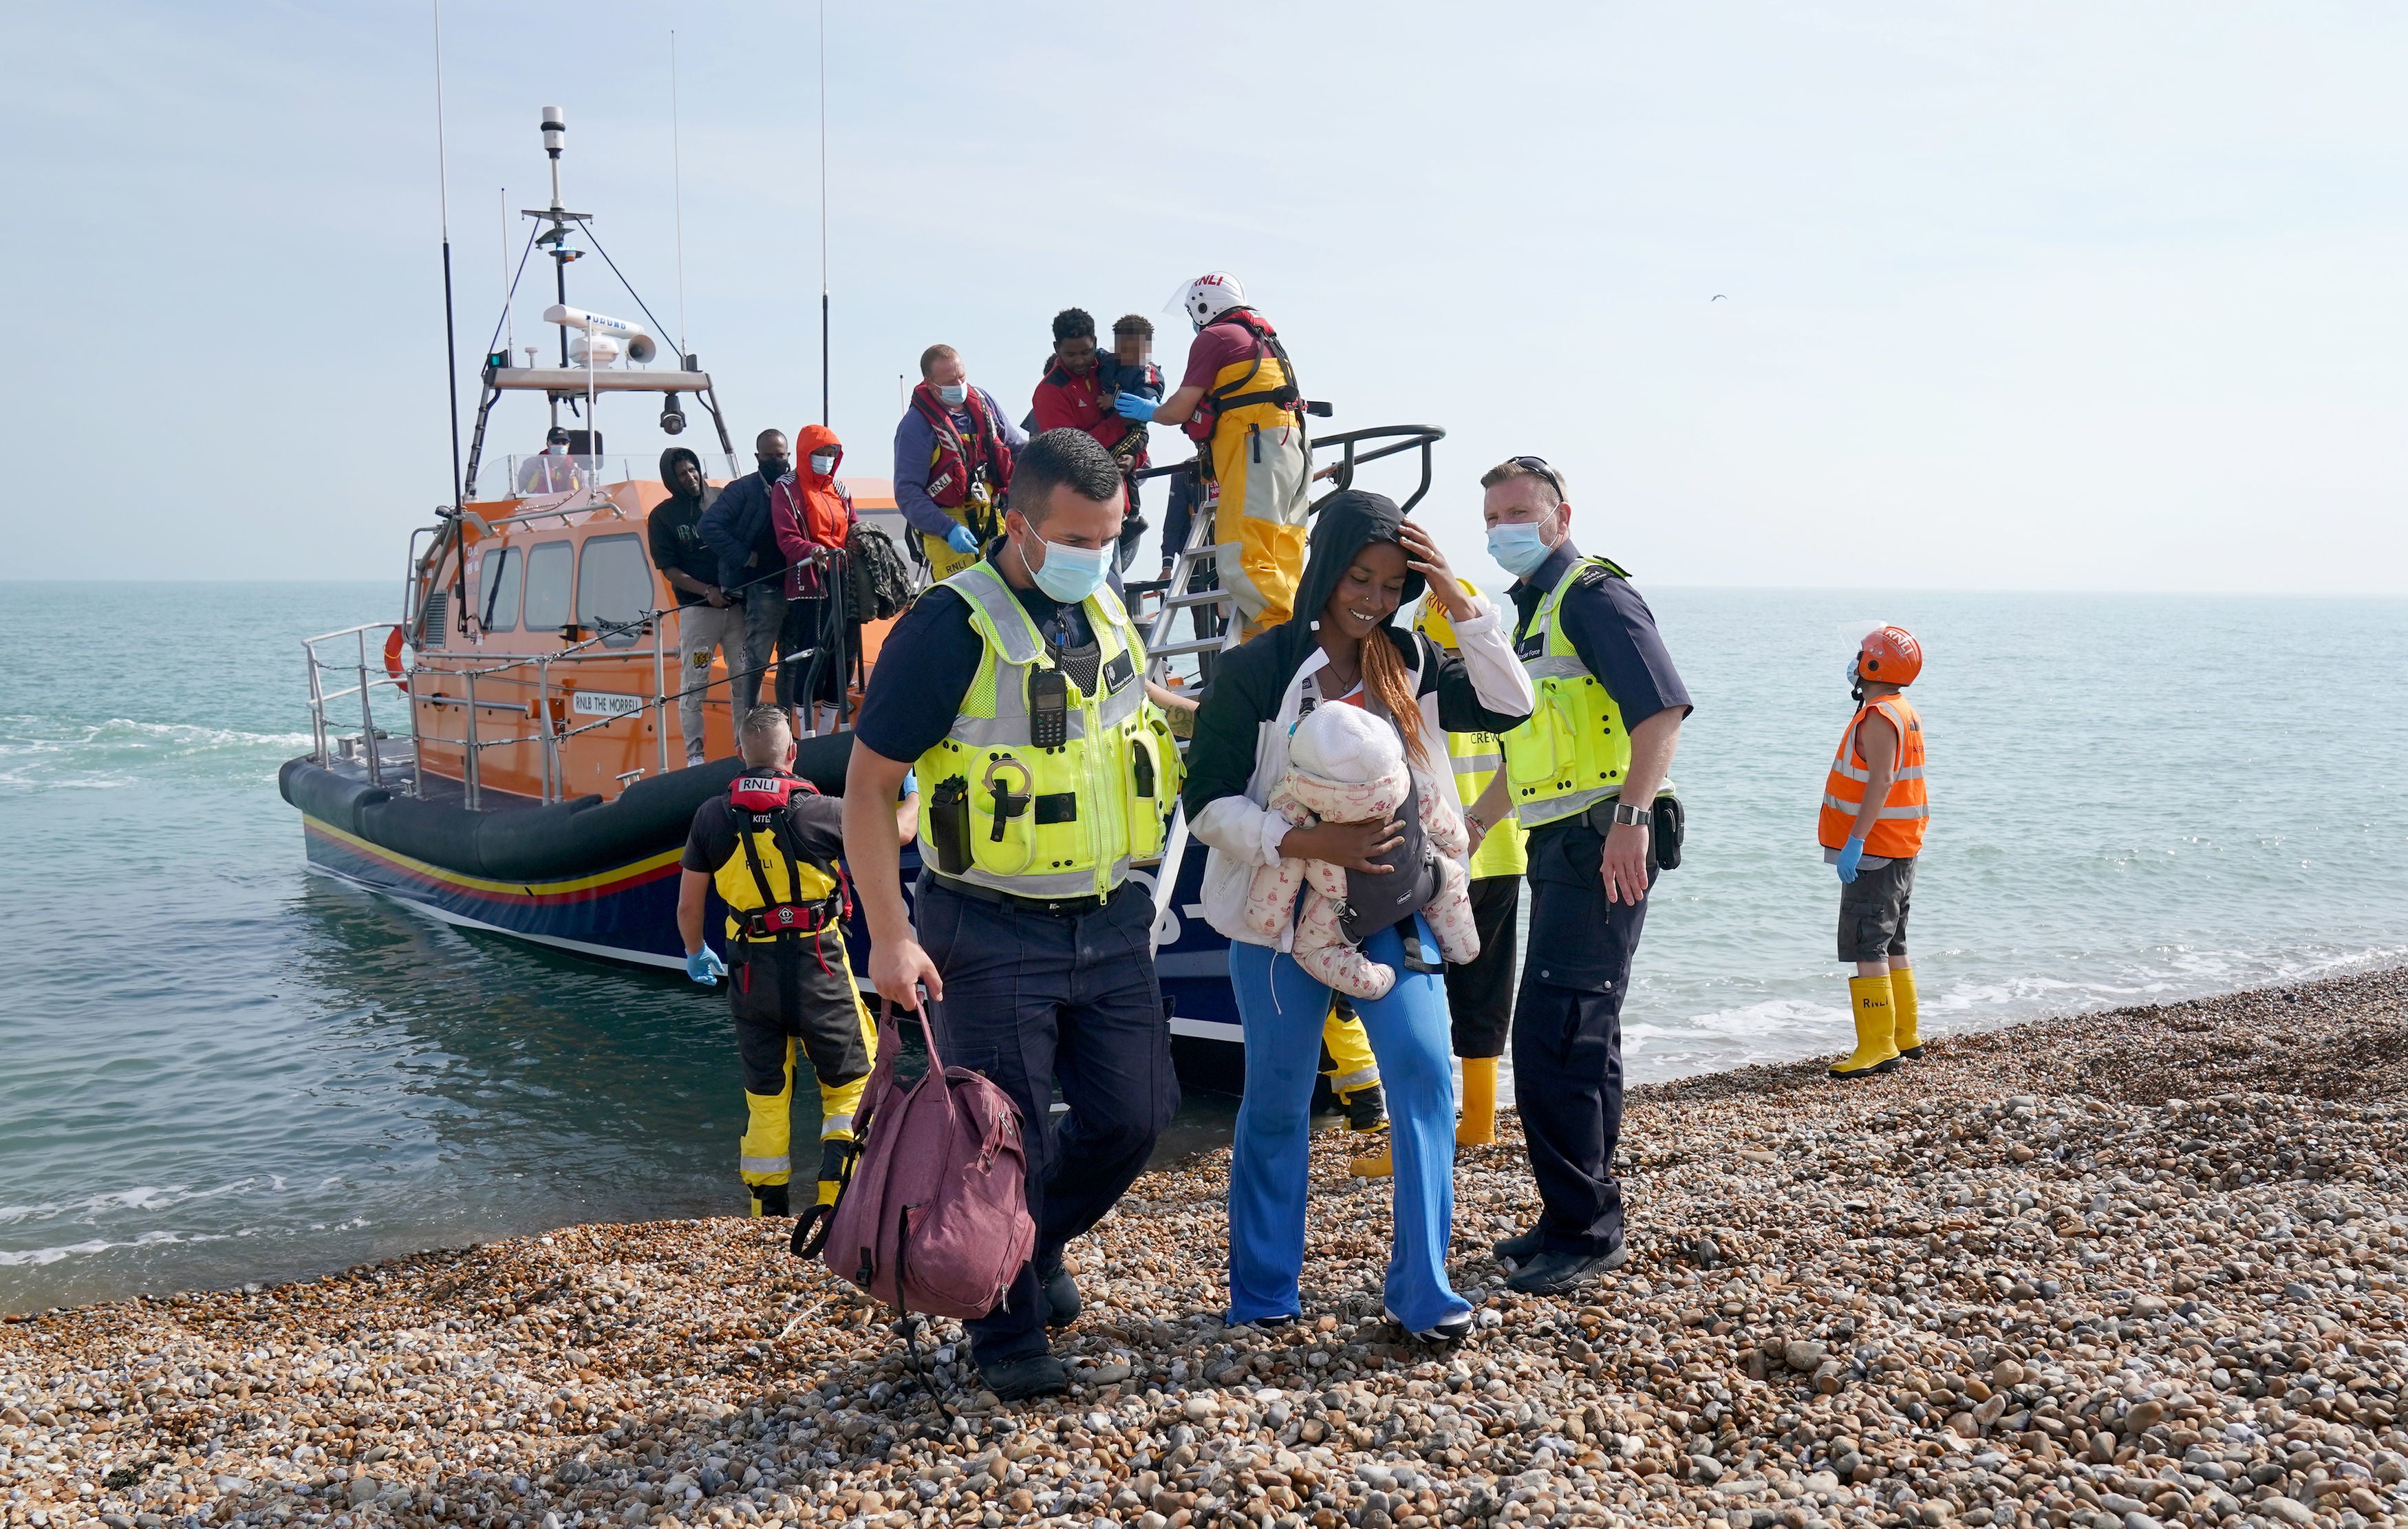 A group of people thought to be migrants are brought ashore from the local lifeboat at Dungeness in Kent, after being picked-up following a small boat incident in the Channel on Monday